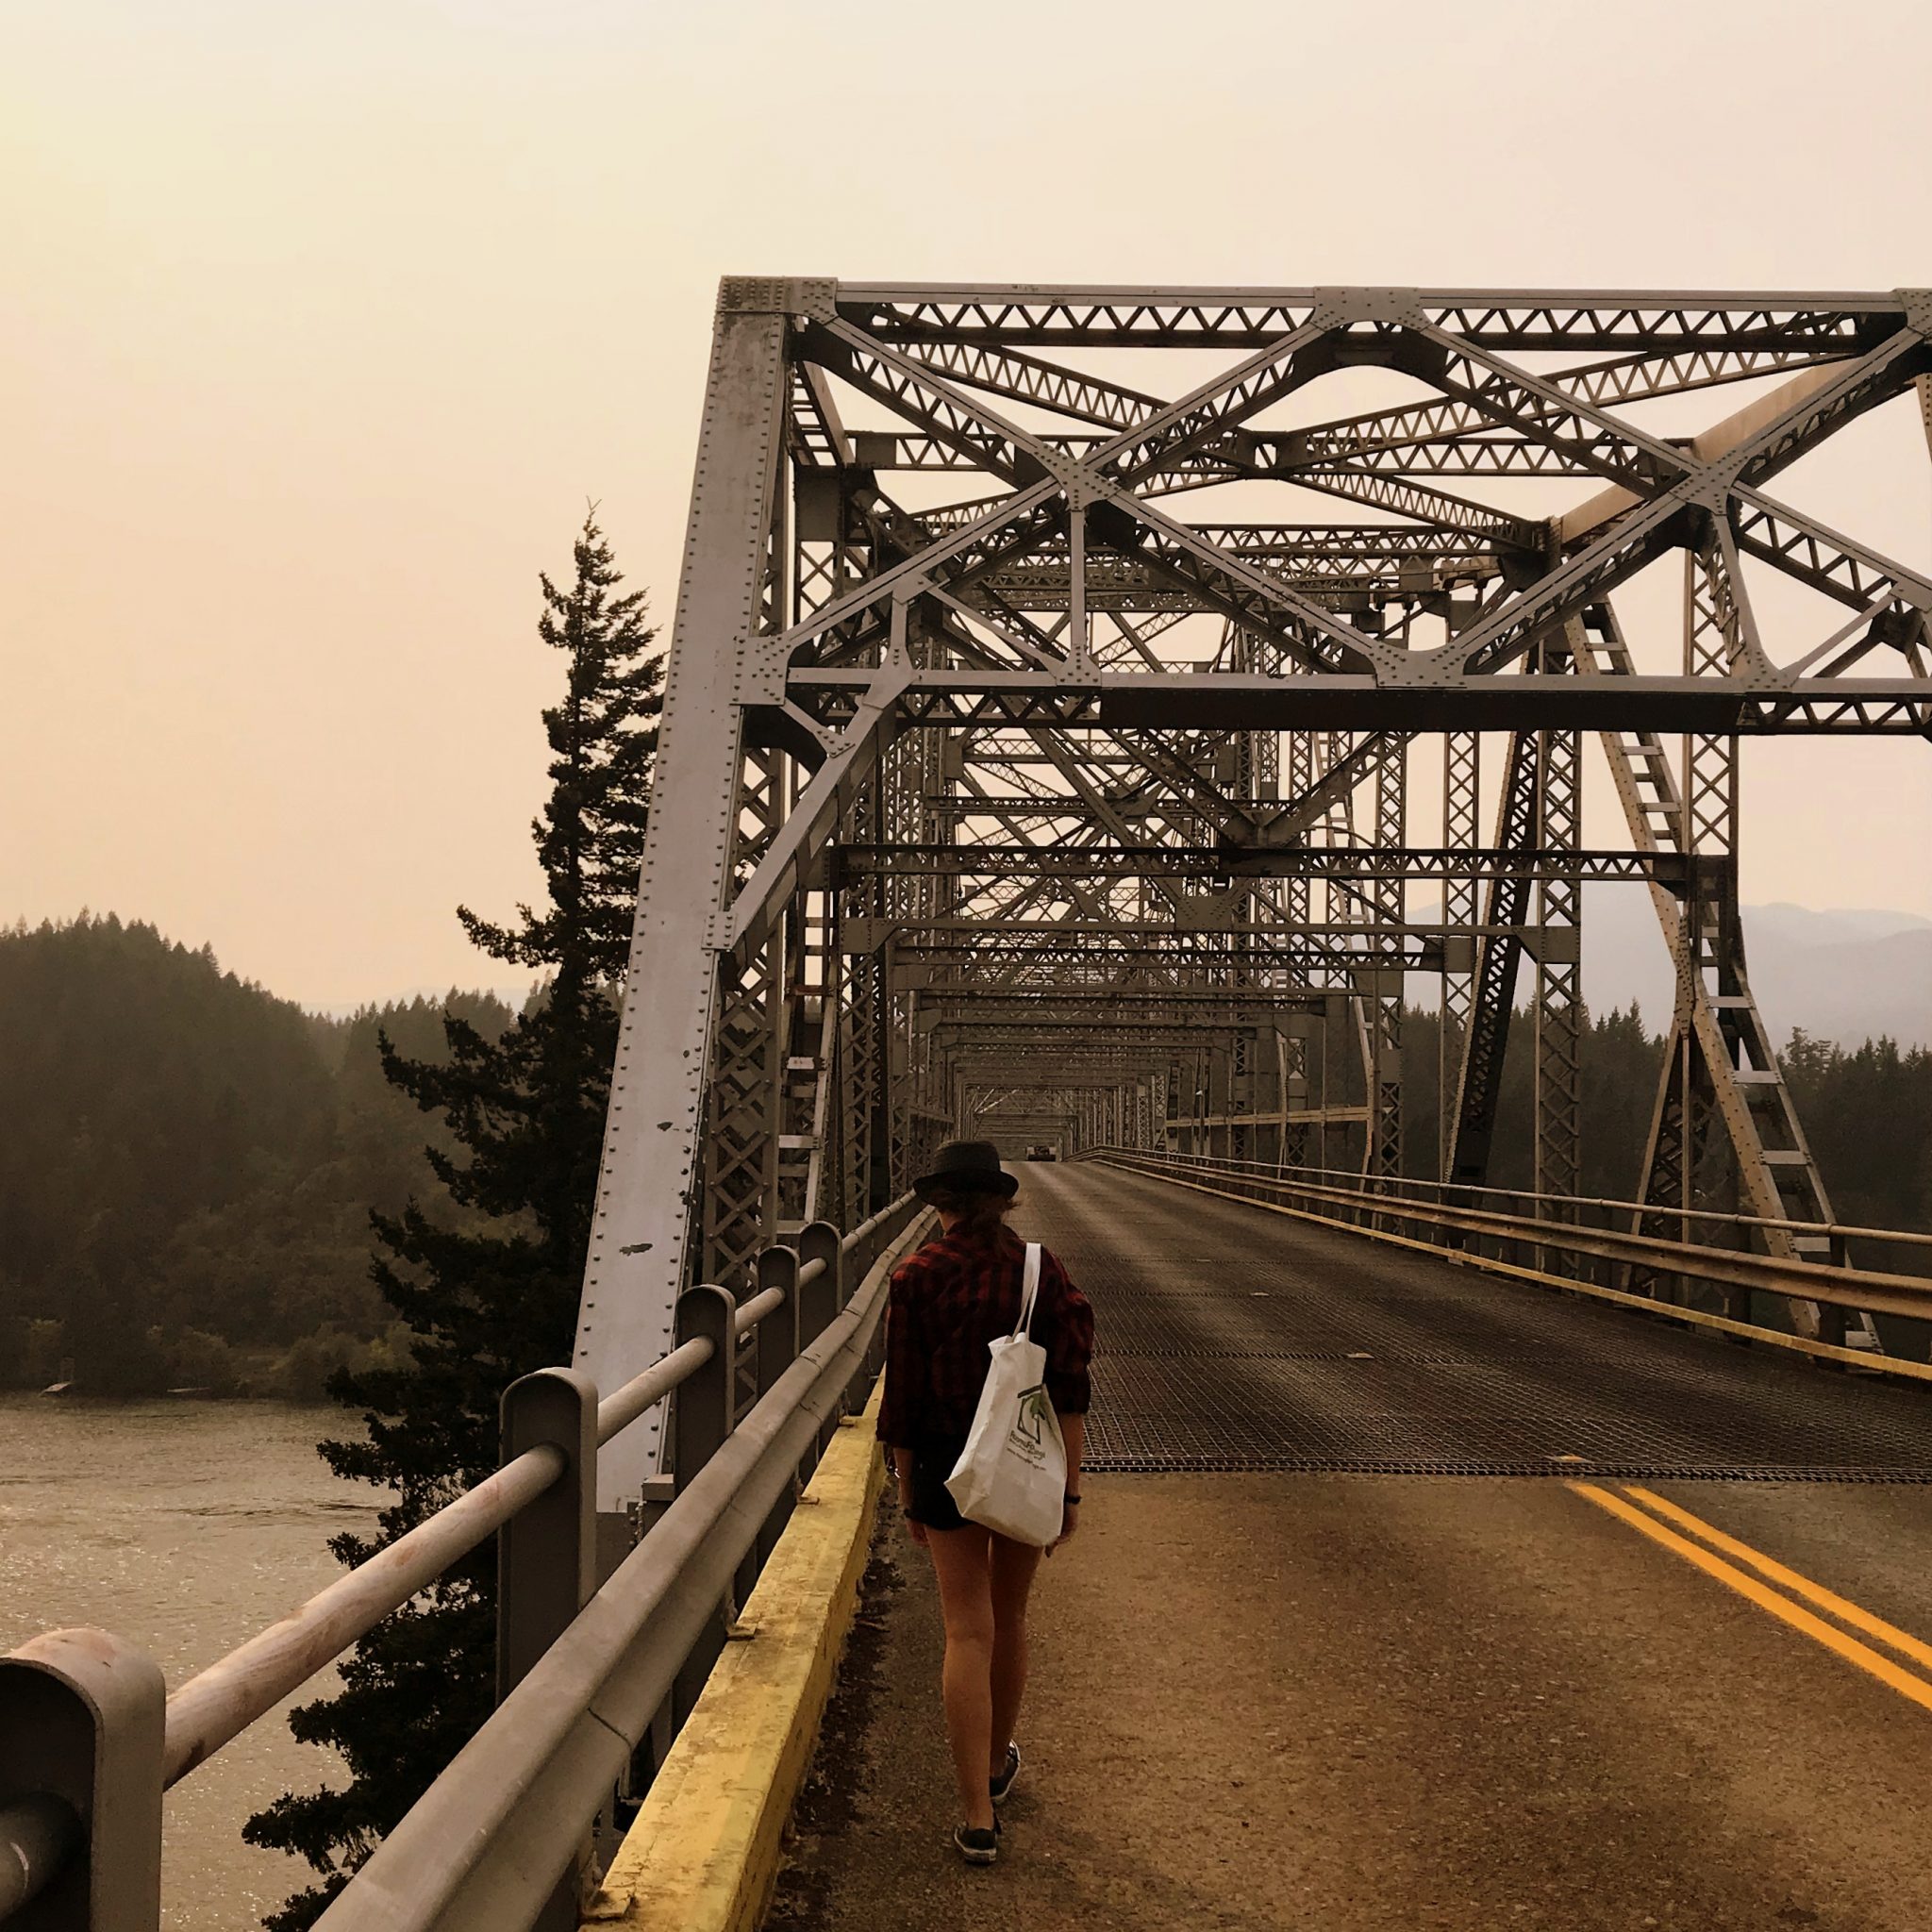 Walk (or drive) across the Bridge of the Gods to set foot in the state of Washington.